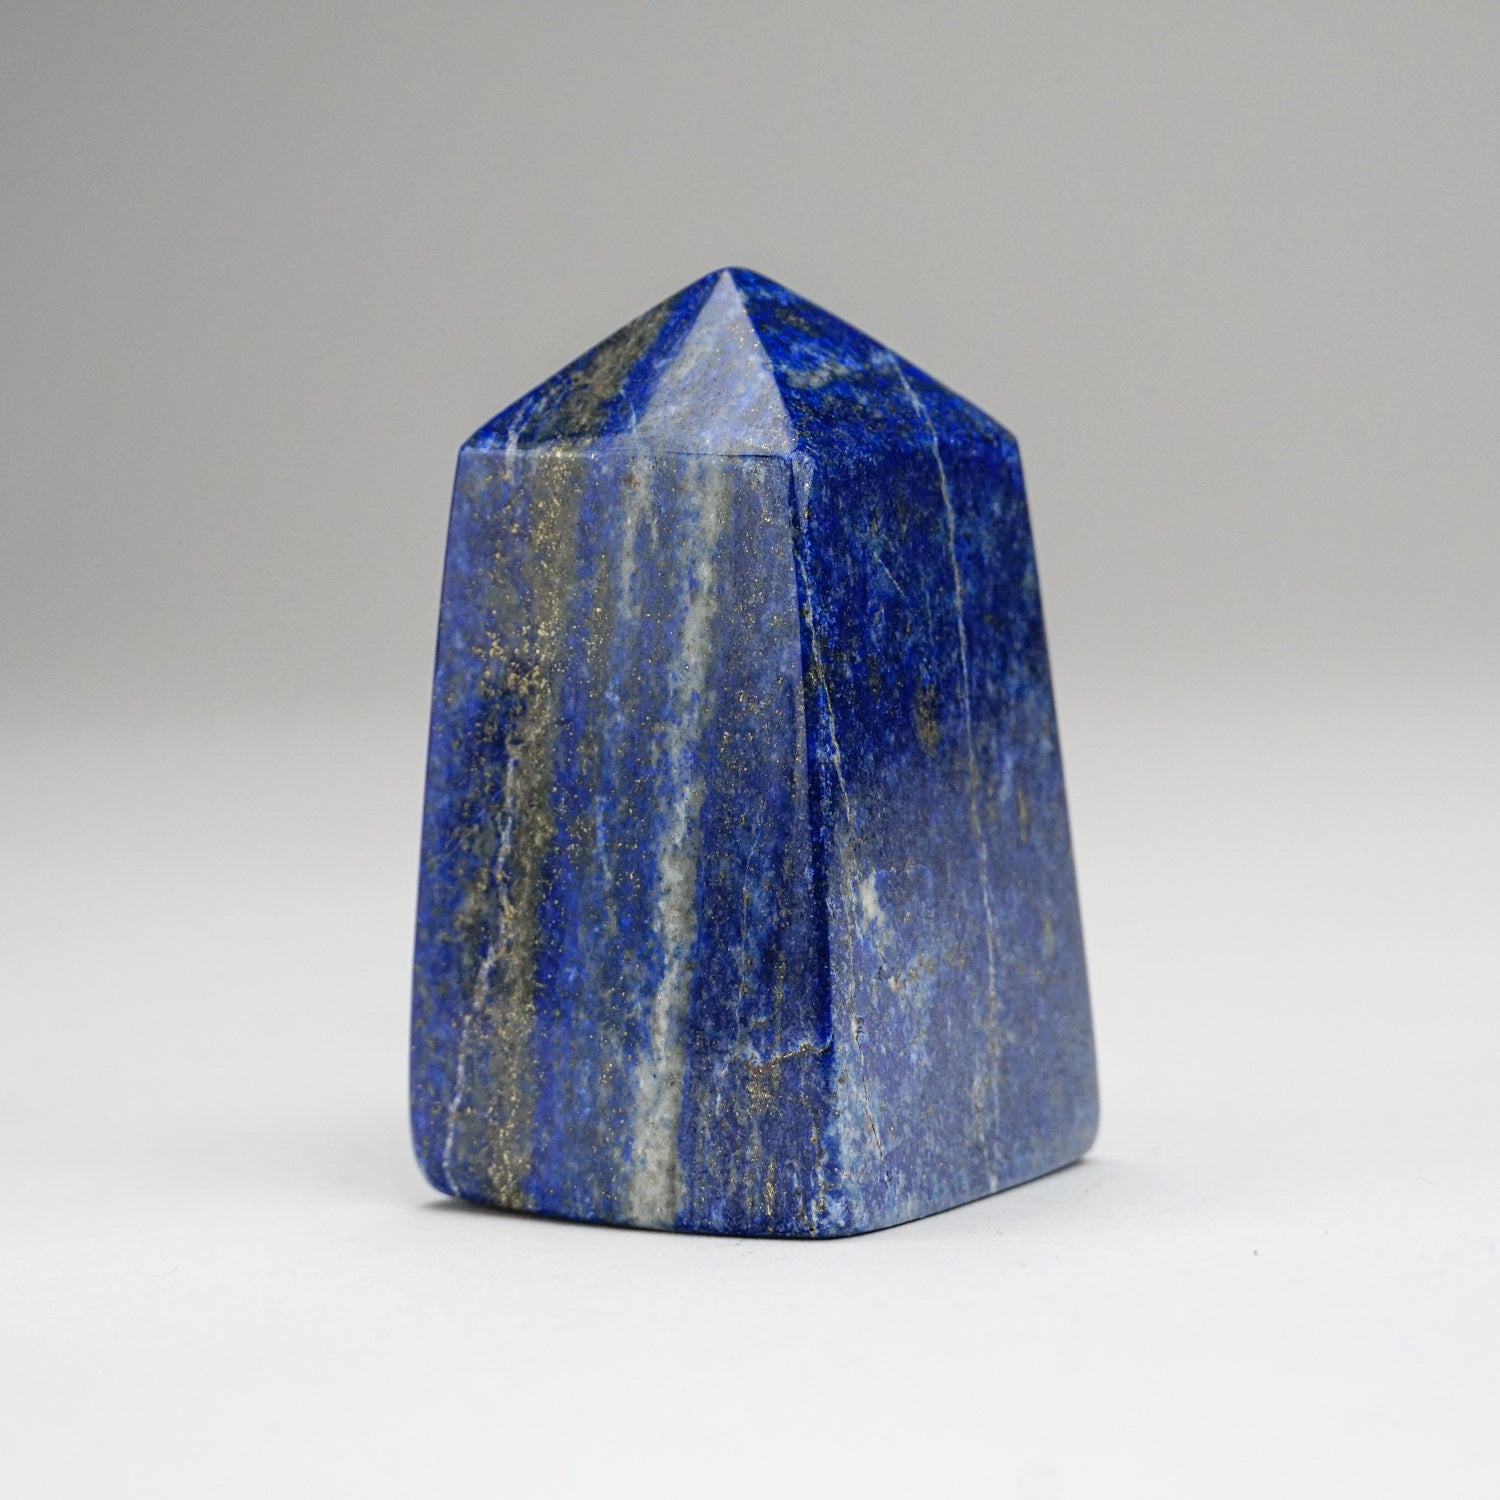 Polished Lapis Lazuli Point from Afghanistan (294.7 grams)